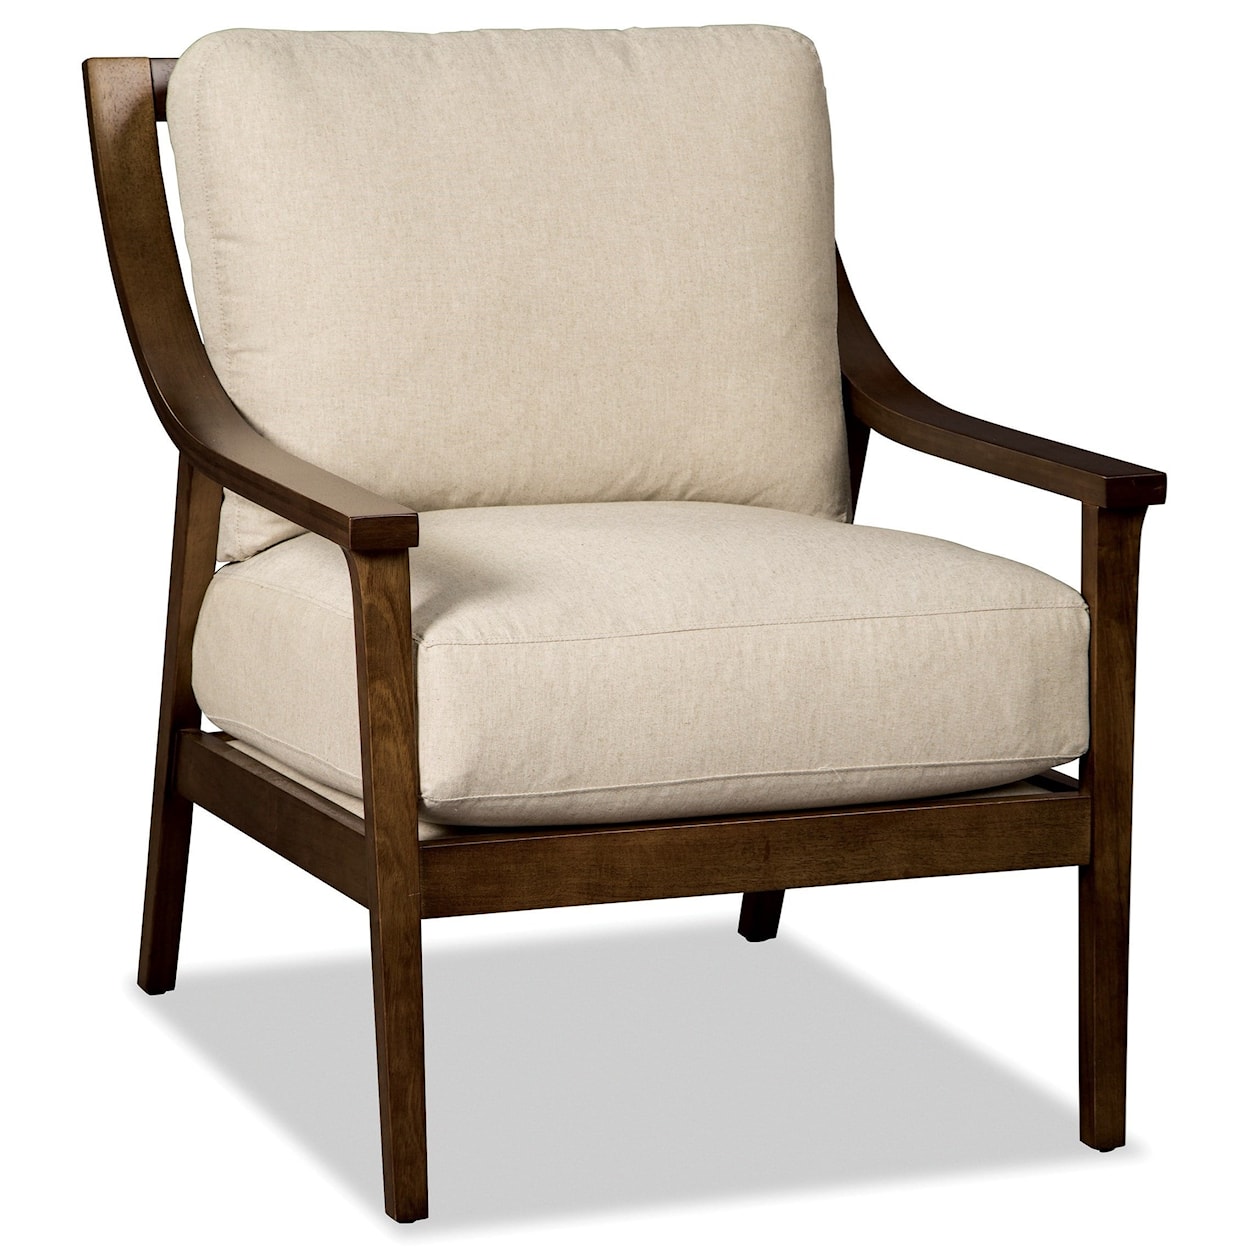 Craftmaster 098910BD Upholstered Chair